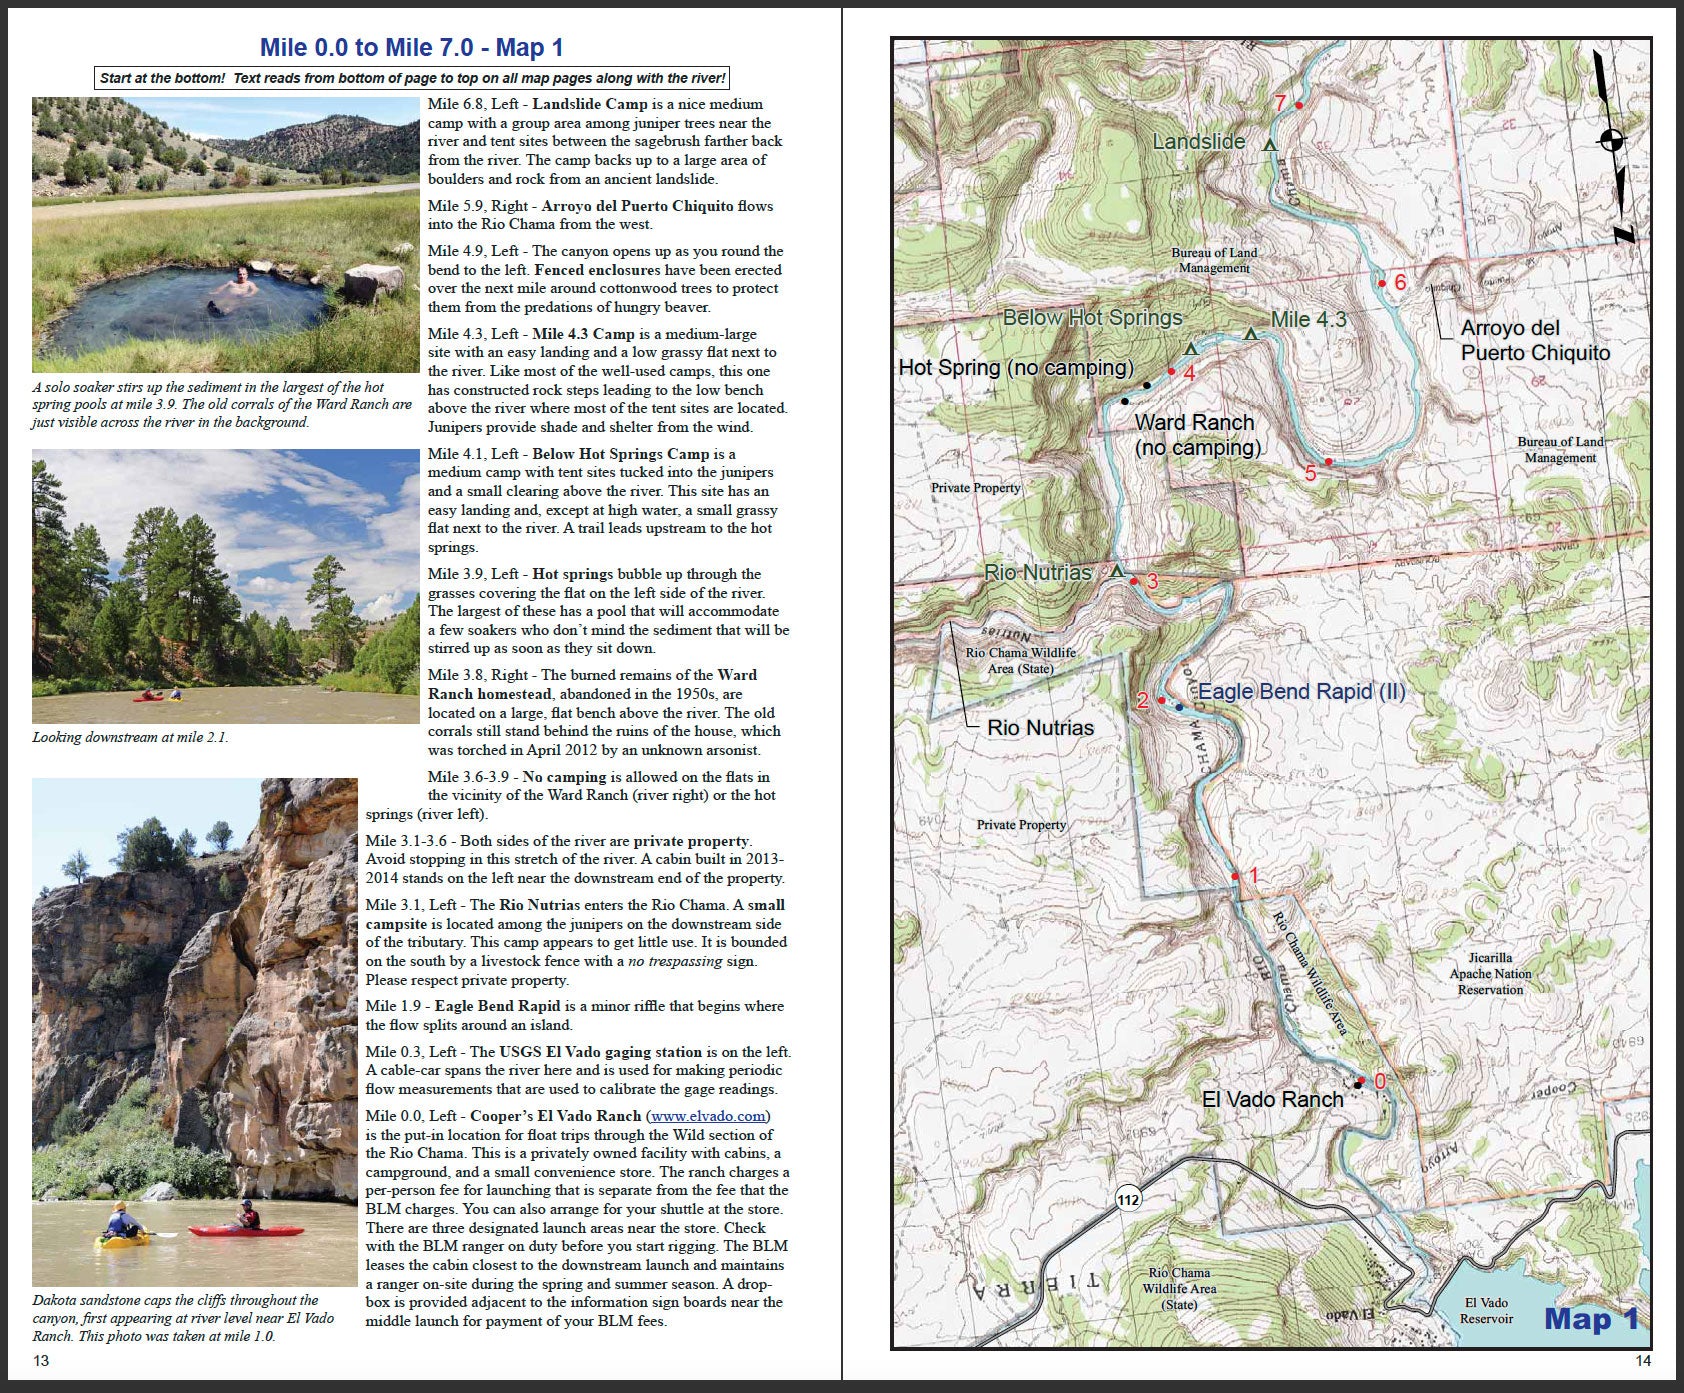 A Rivermaps waterproof guide book featuring a map of the Rio Chama river: Guide to the Rio Chama in New Mexico.